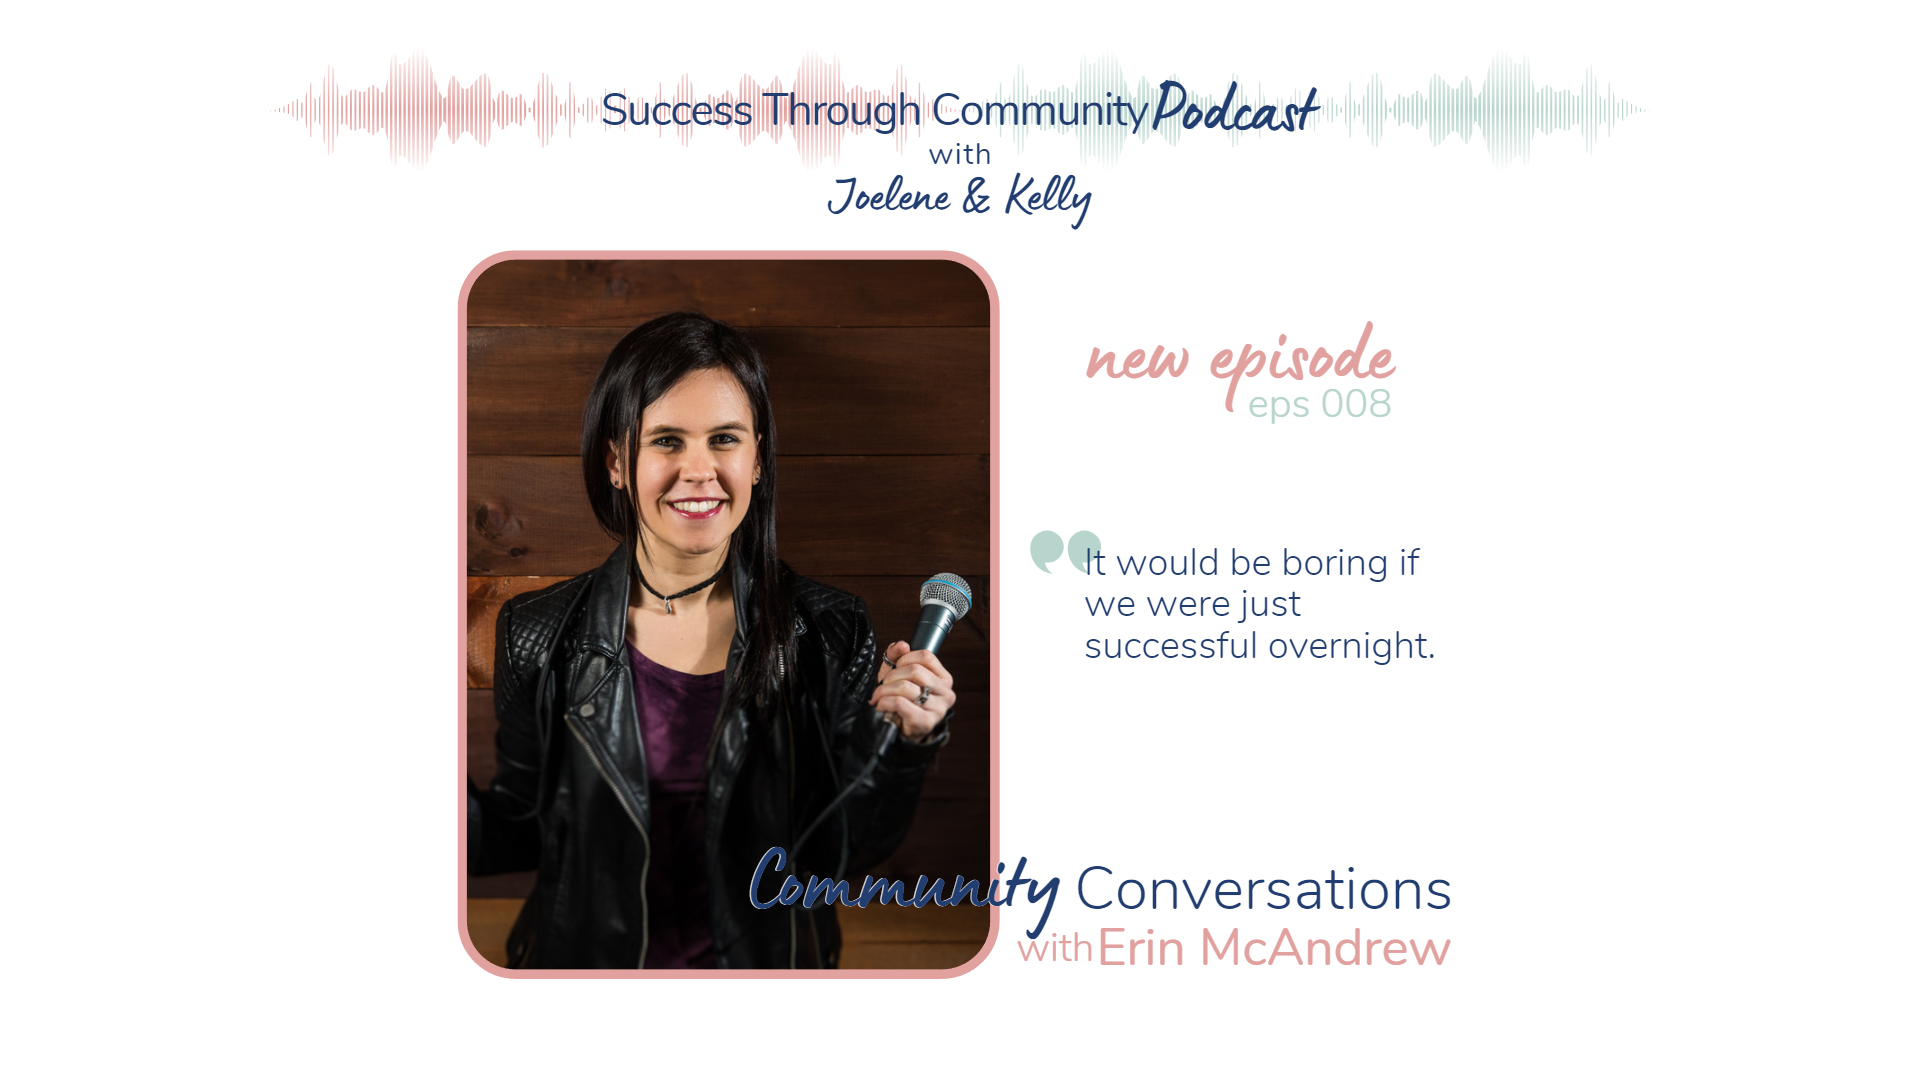 Success Through Community Podcast with Erin McAndrew